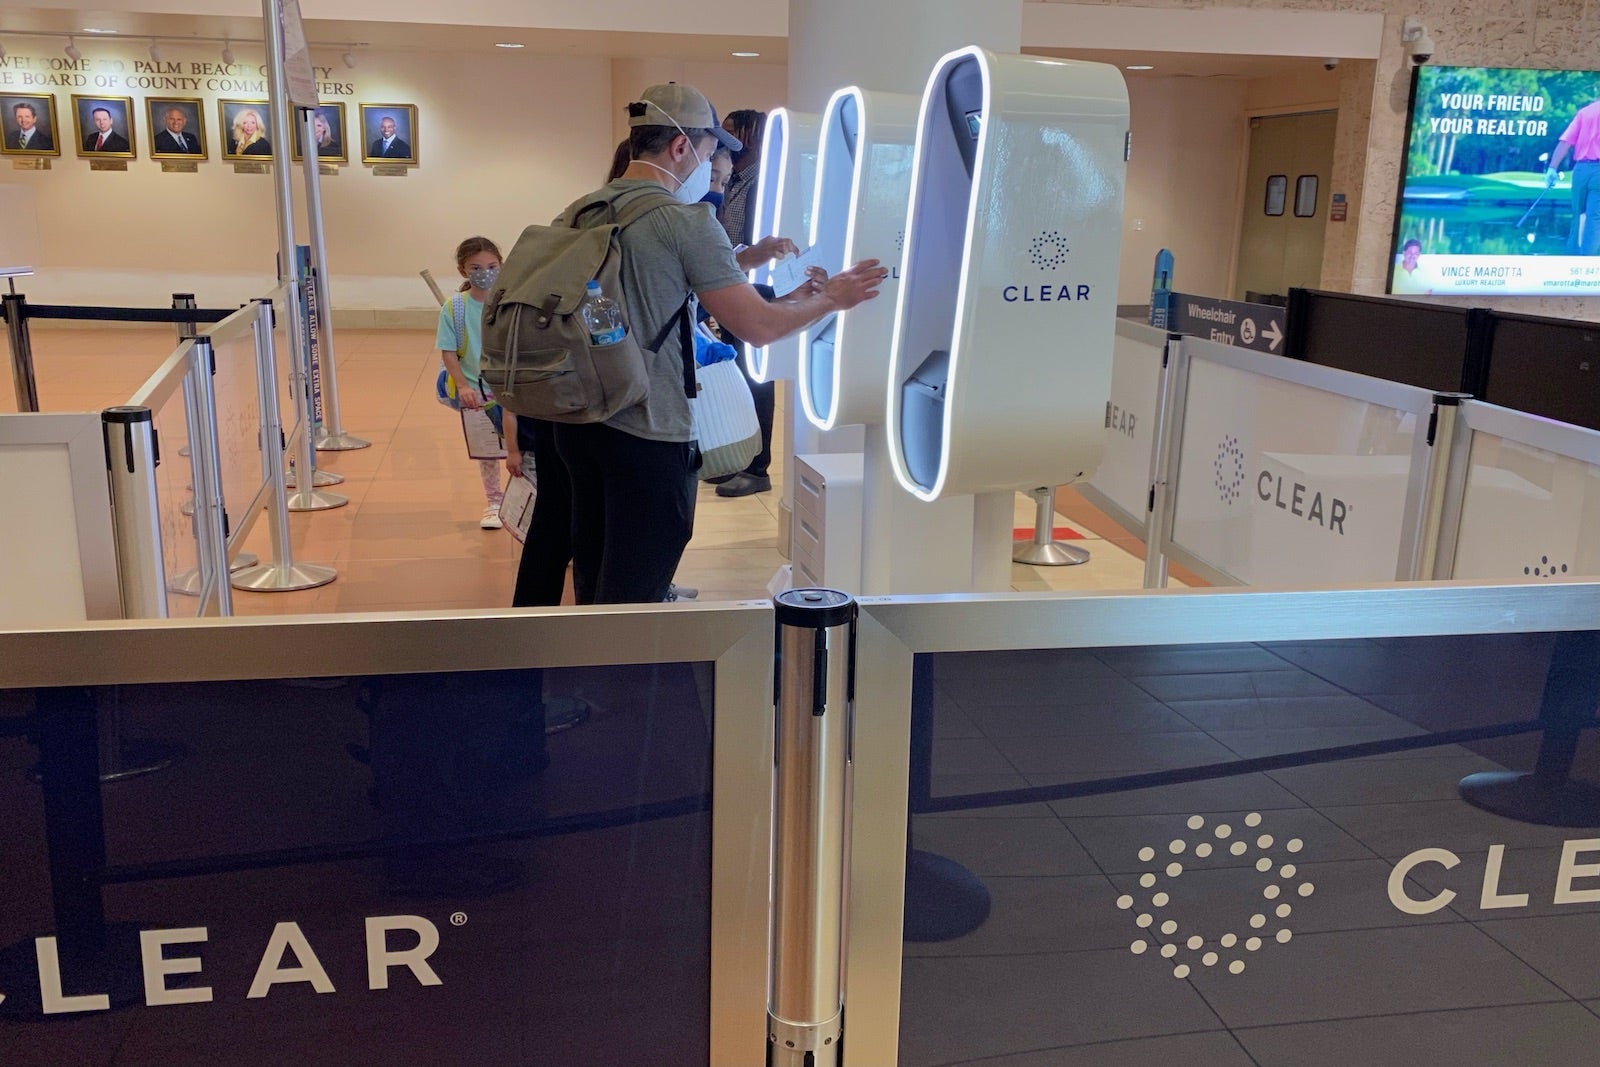 clear kiosks in airport